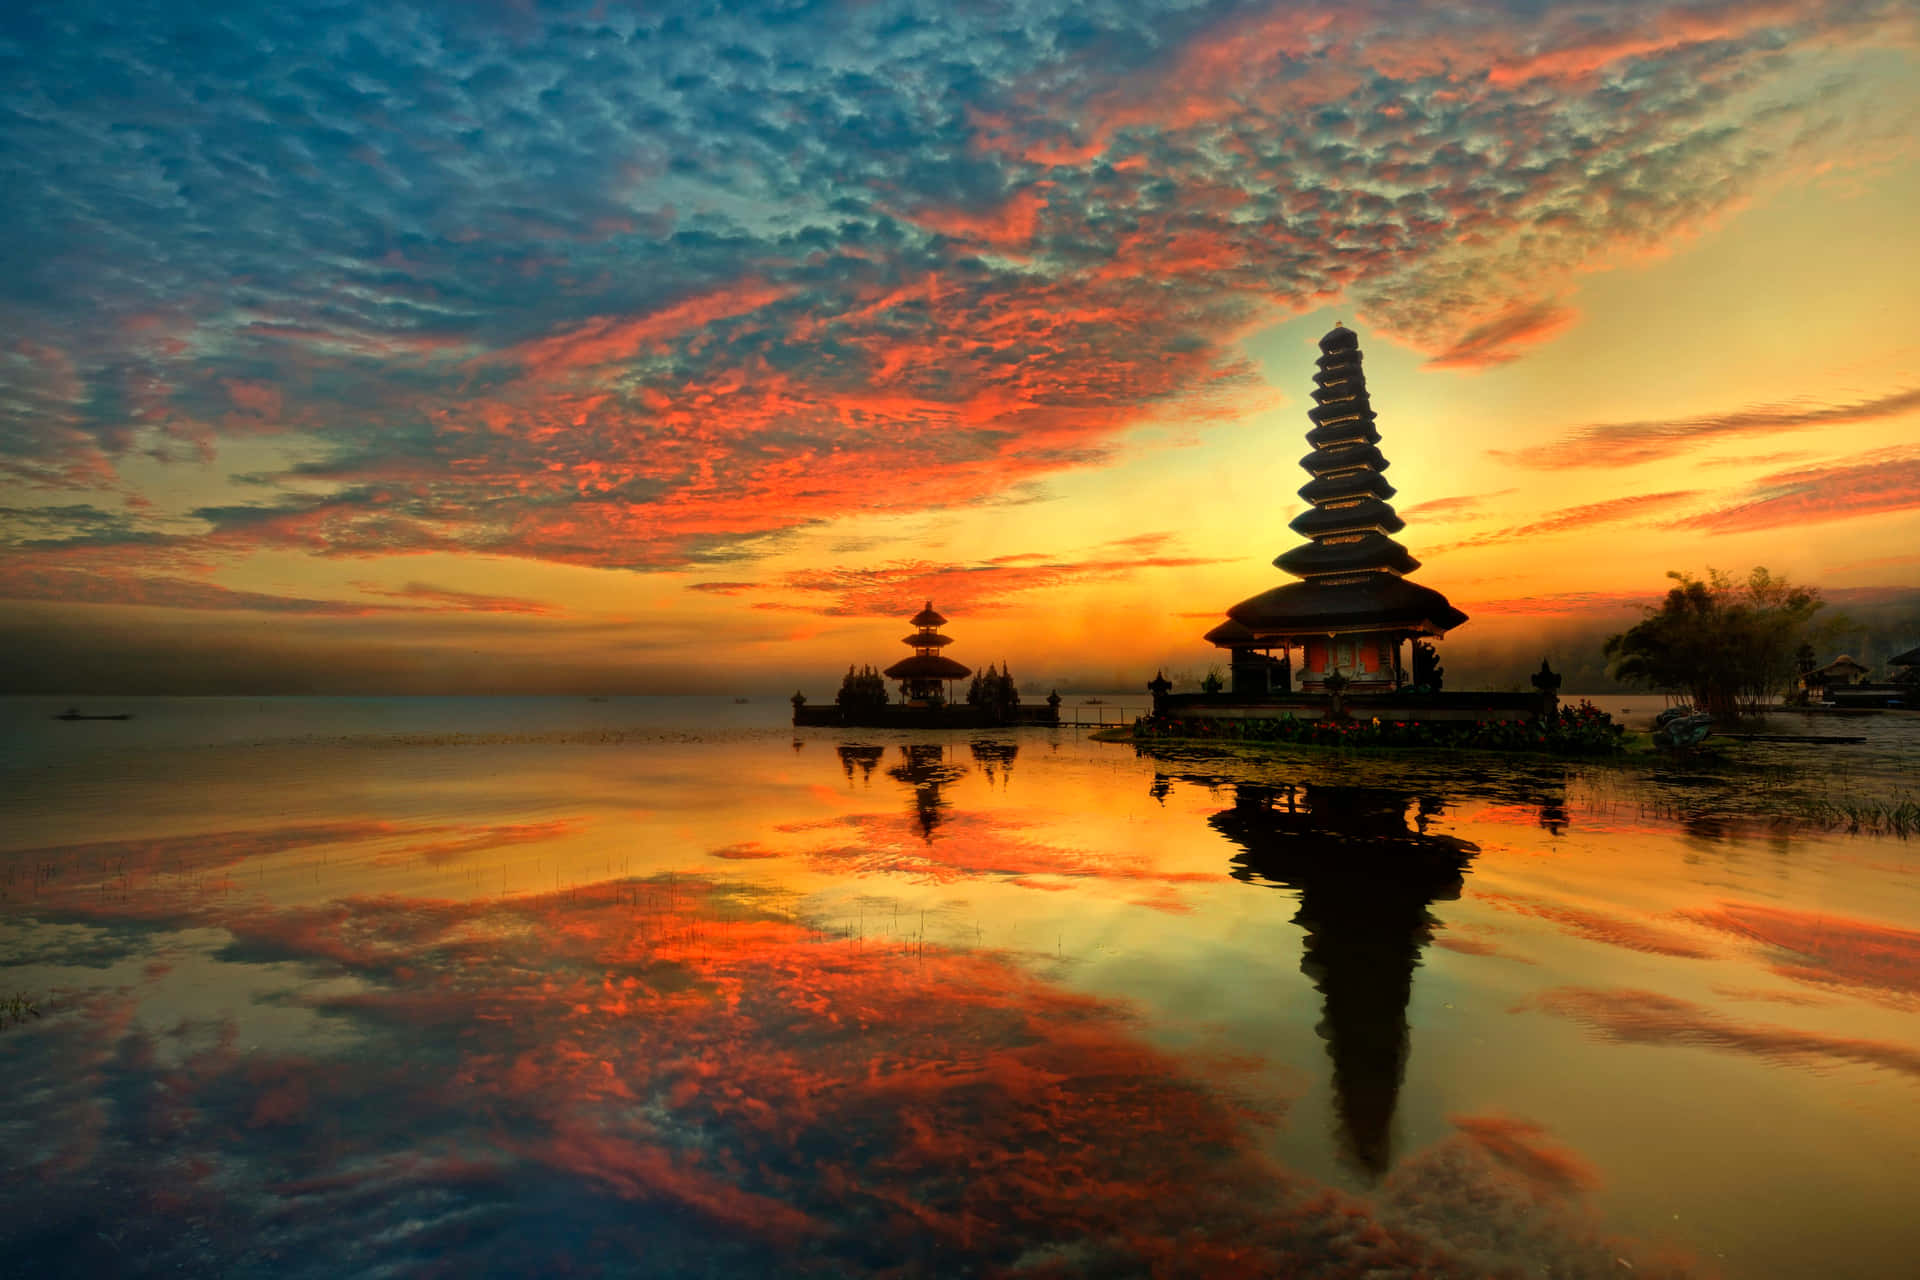 Take a break from reality in the beautiful paradise of Bali!